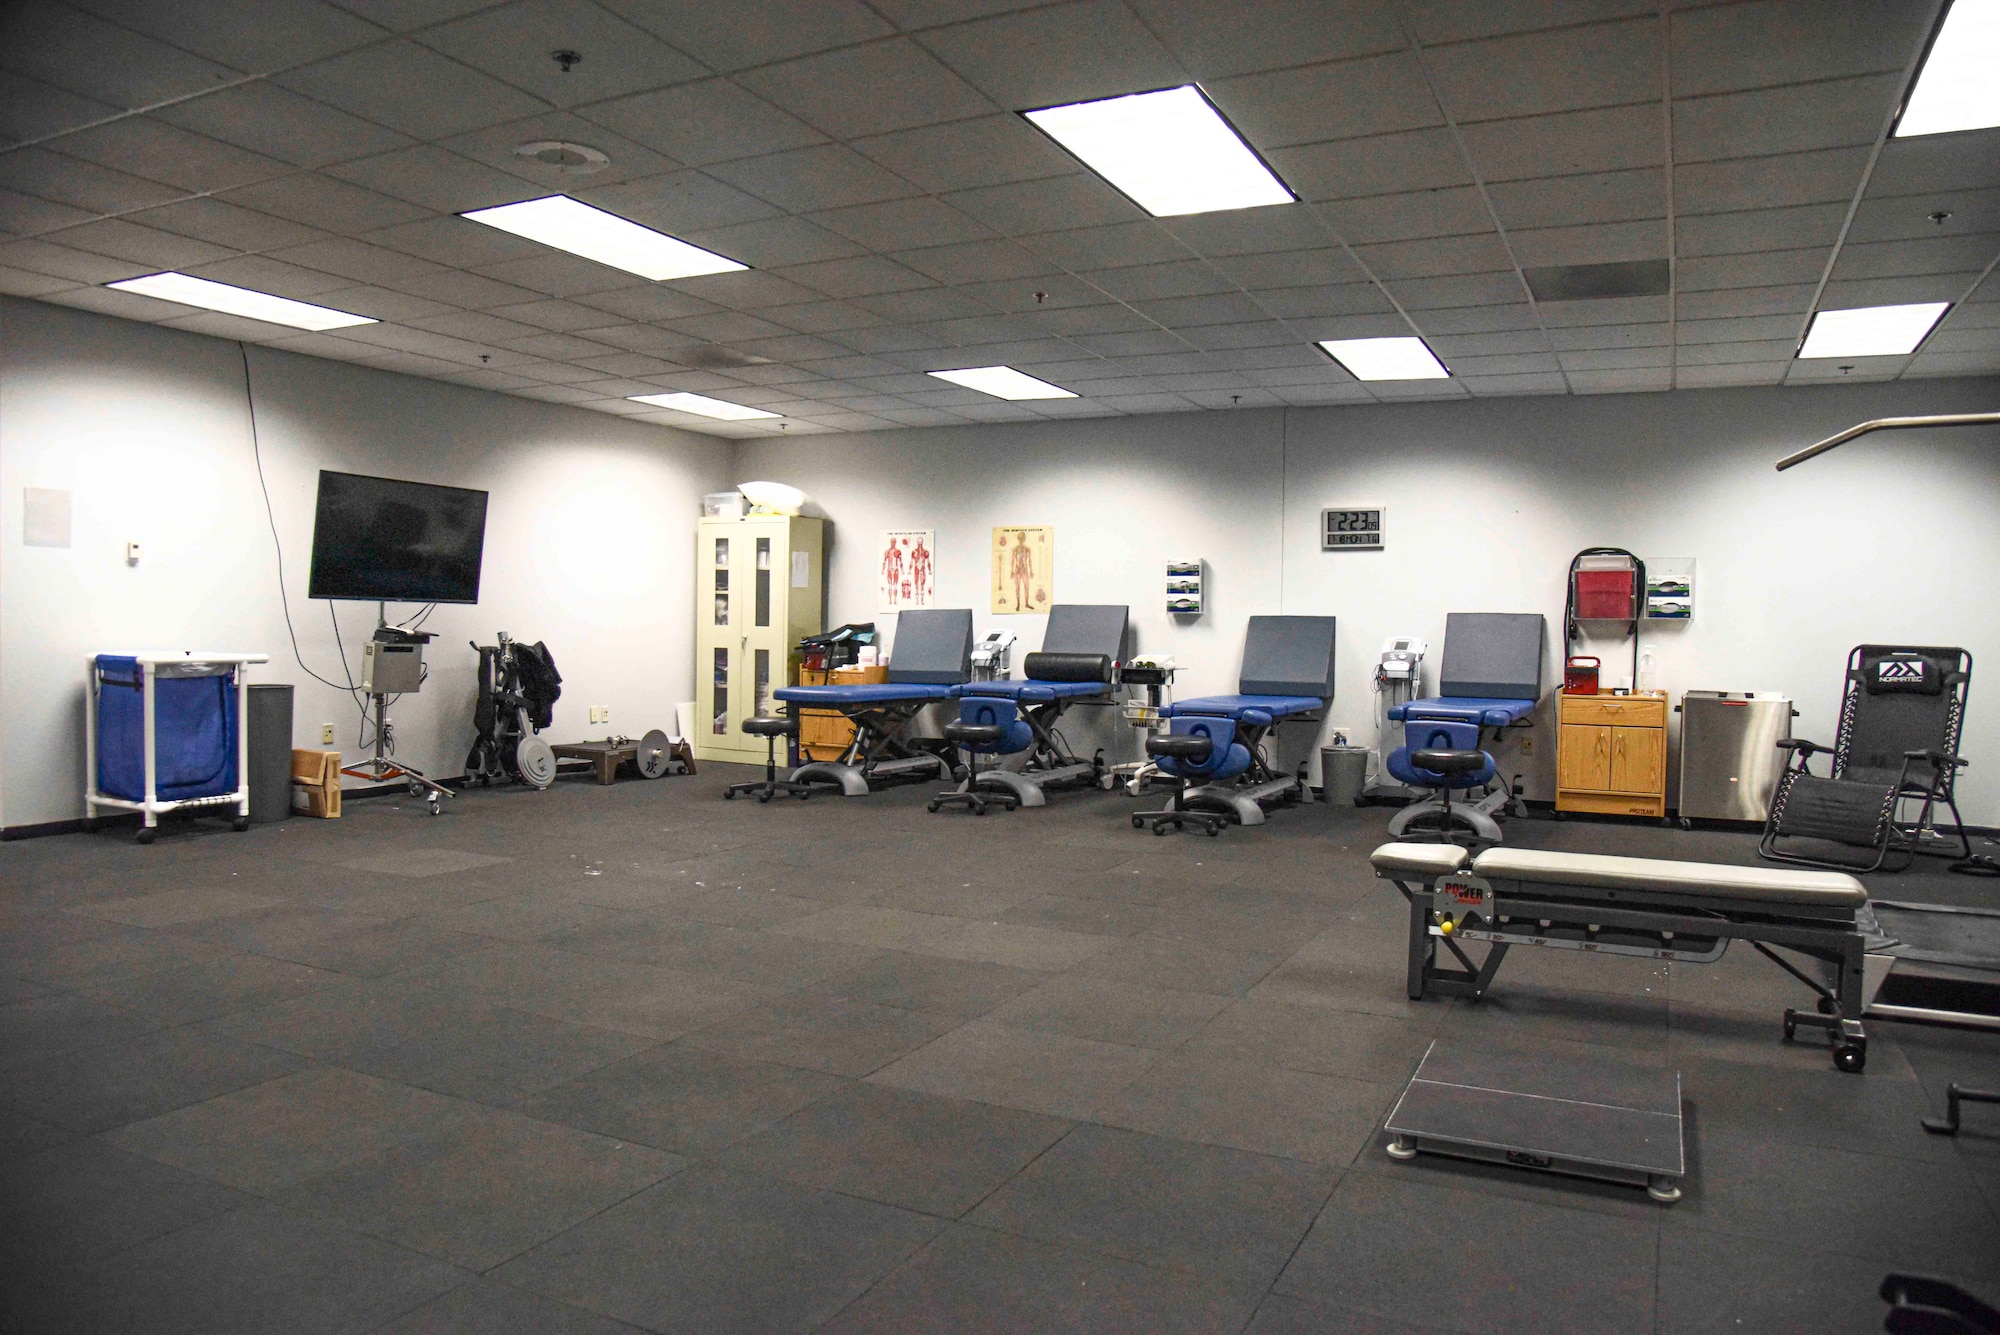 Pictured above is a room with various physical therapy tools and examination tables.